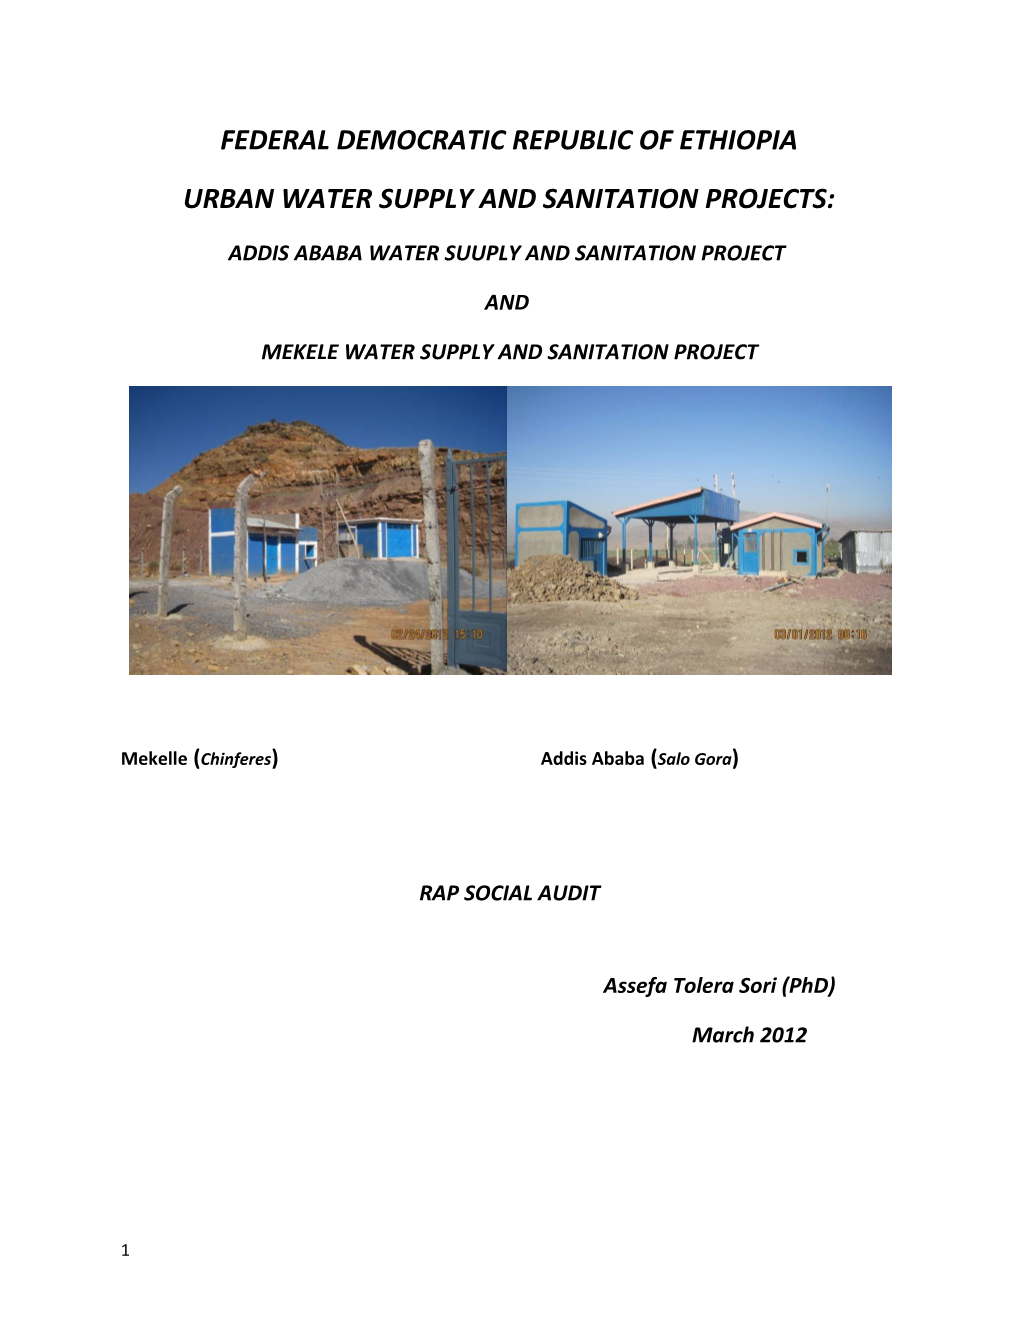 Urban Water Supply and Sanitation Projects